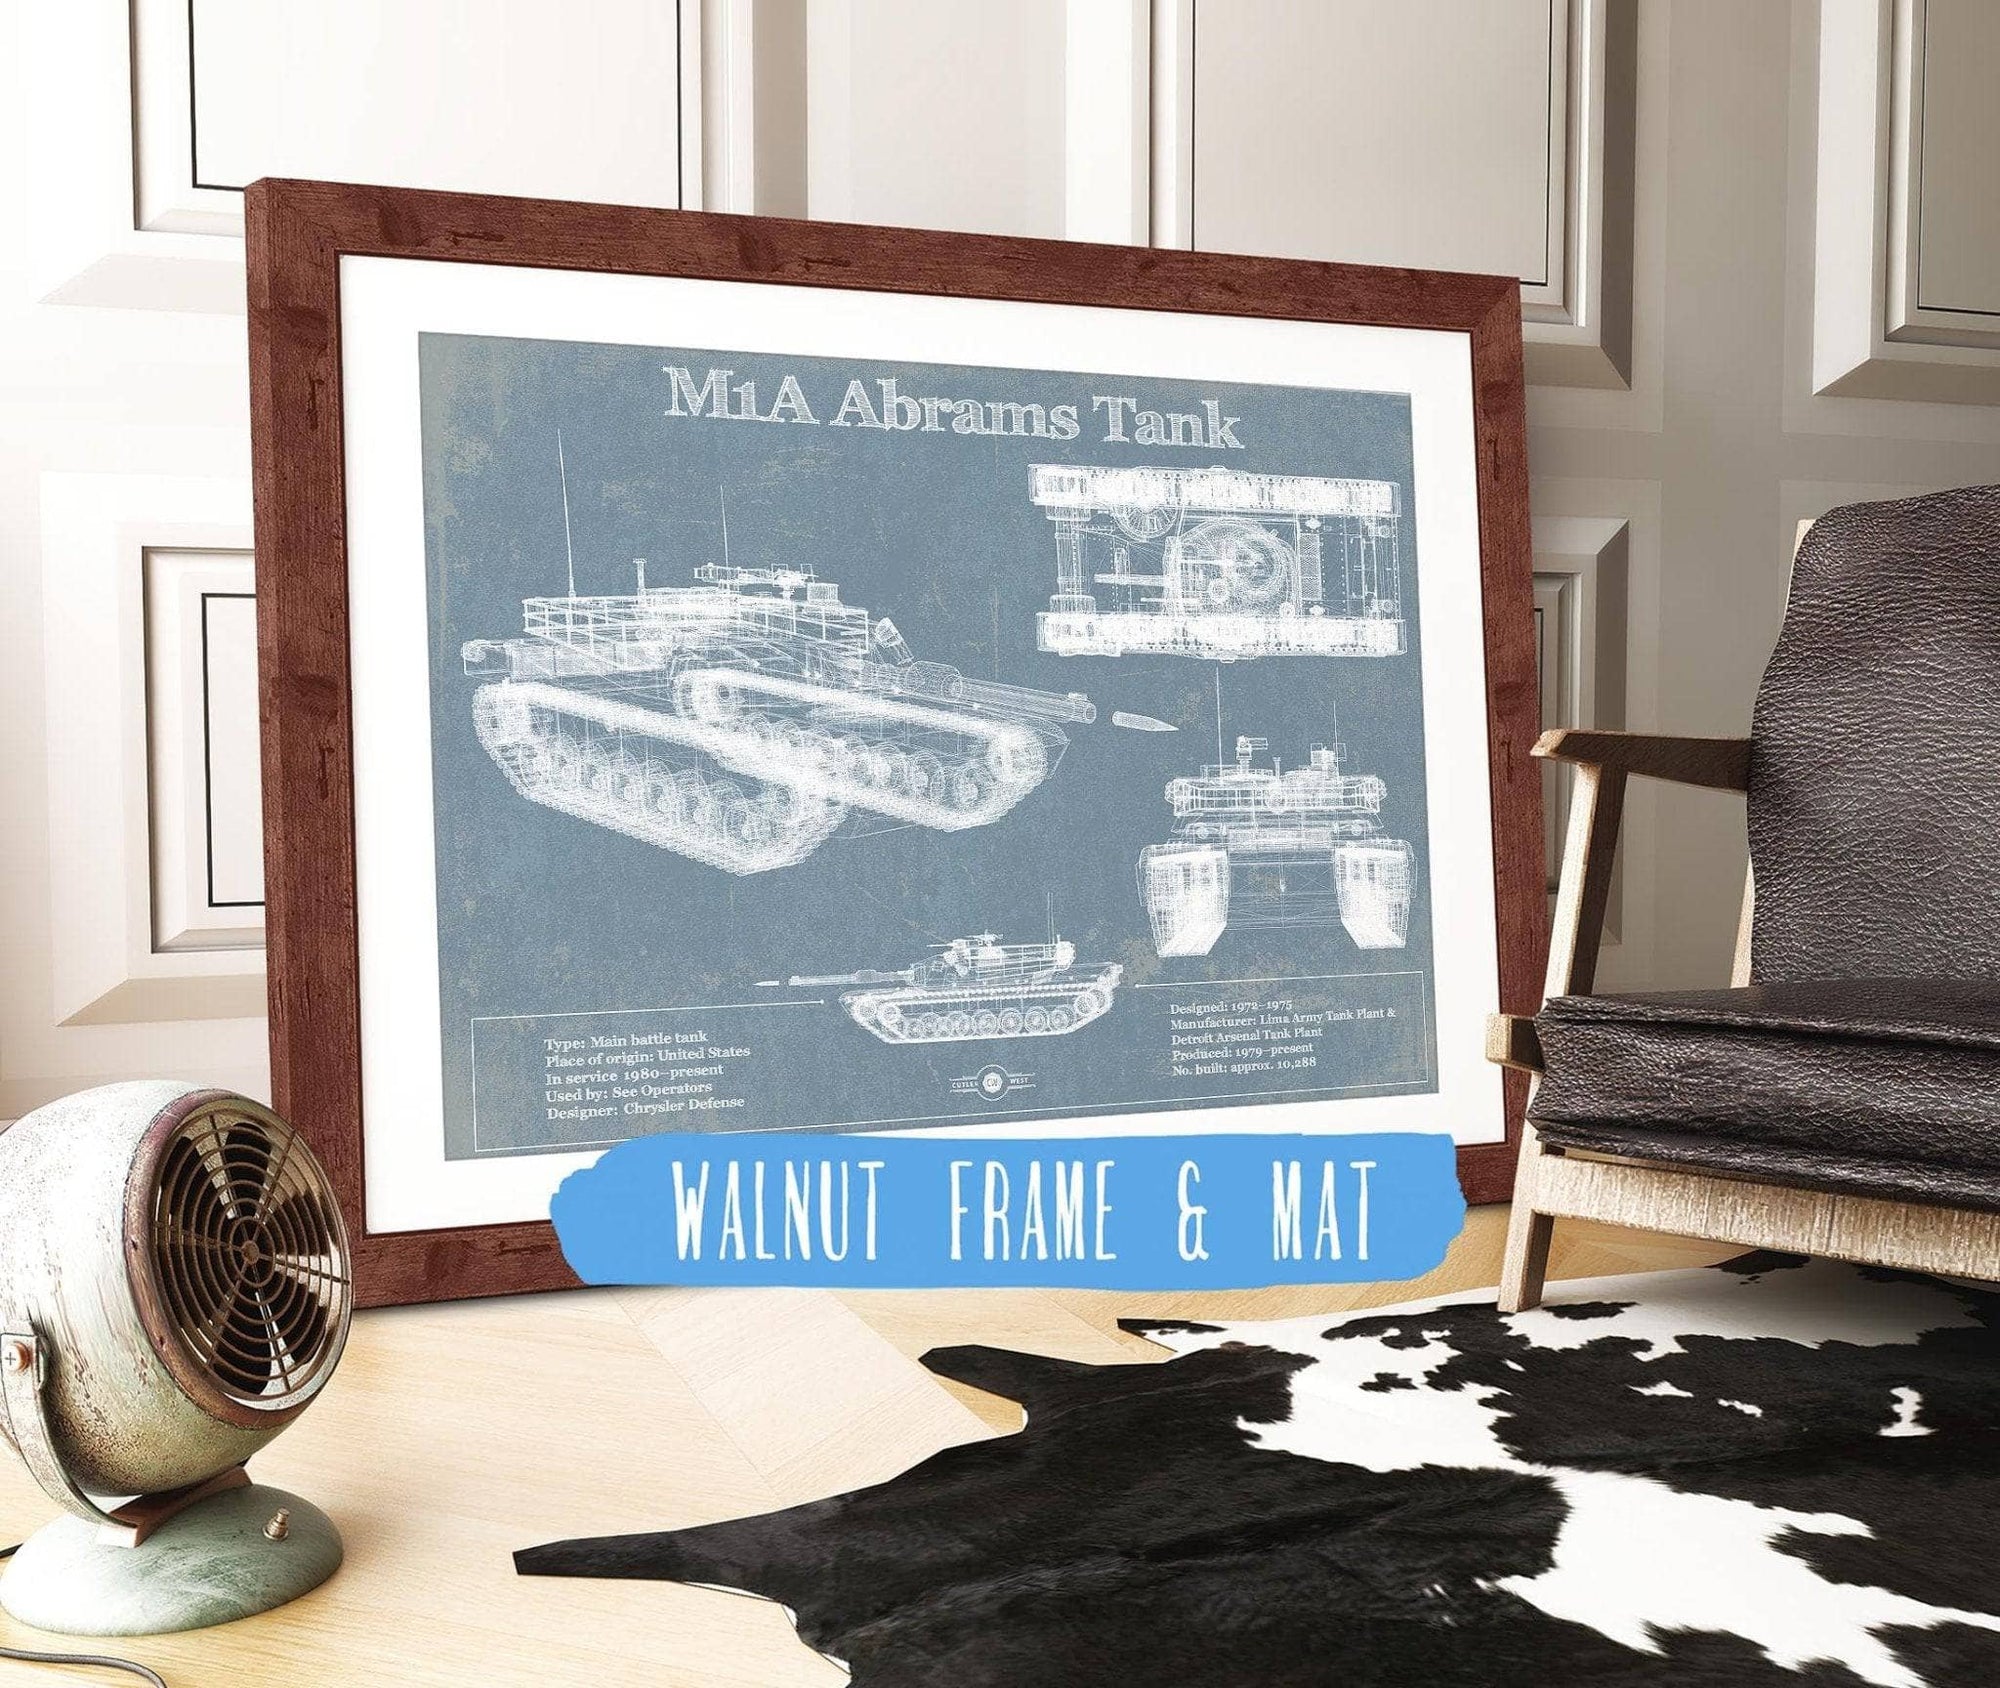 Cutler West Military Weapons Collection 14" x 11" / Walnut Frame & Mat M1A Abrams Tank Vintage Blueprint Print 891066671_18728